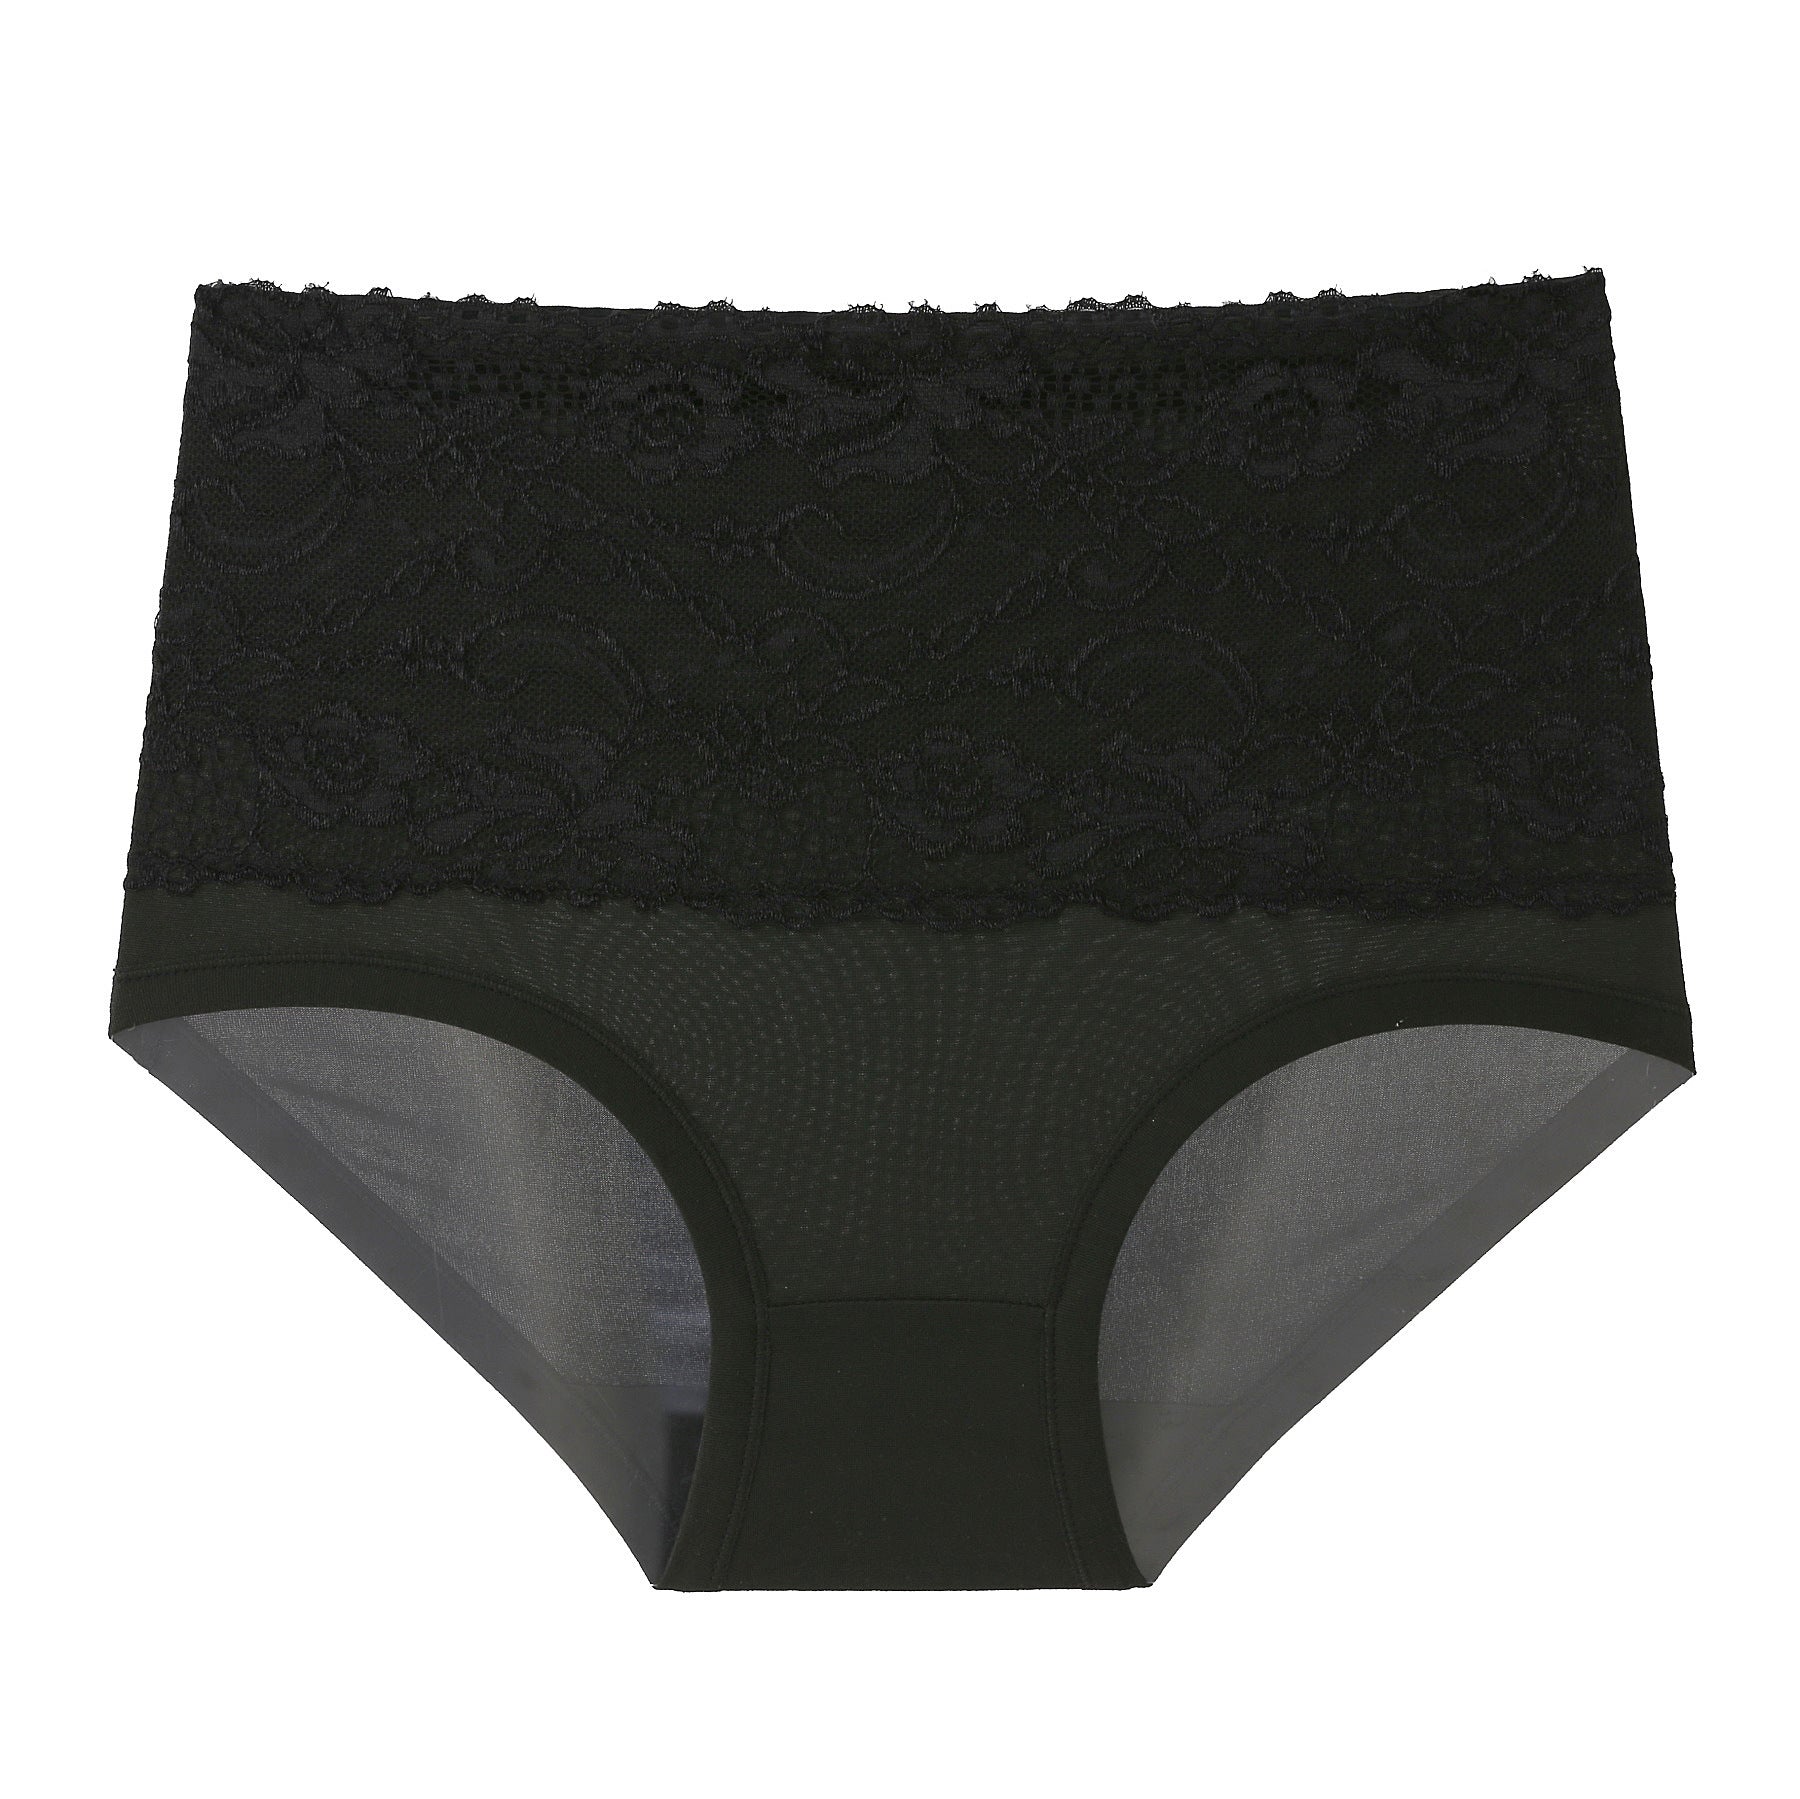 Wholesale V Cut Panties Cotton, Lace, Seamless, Shaping 